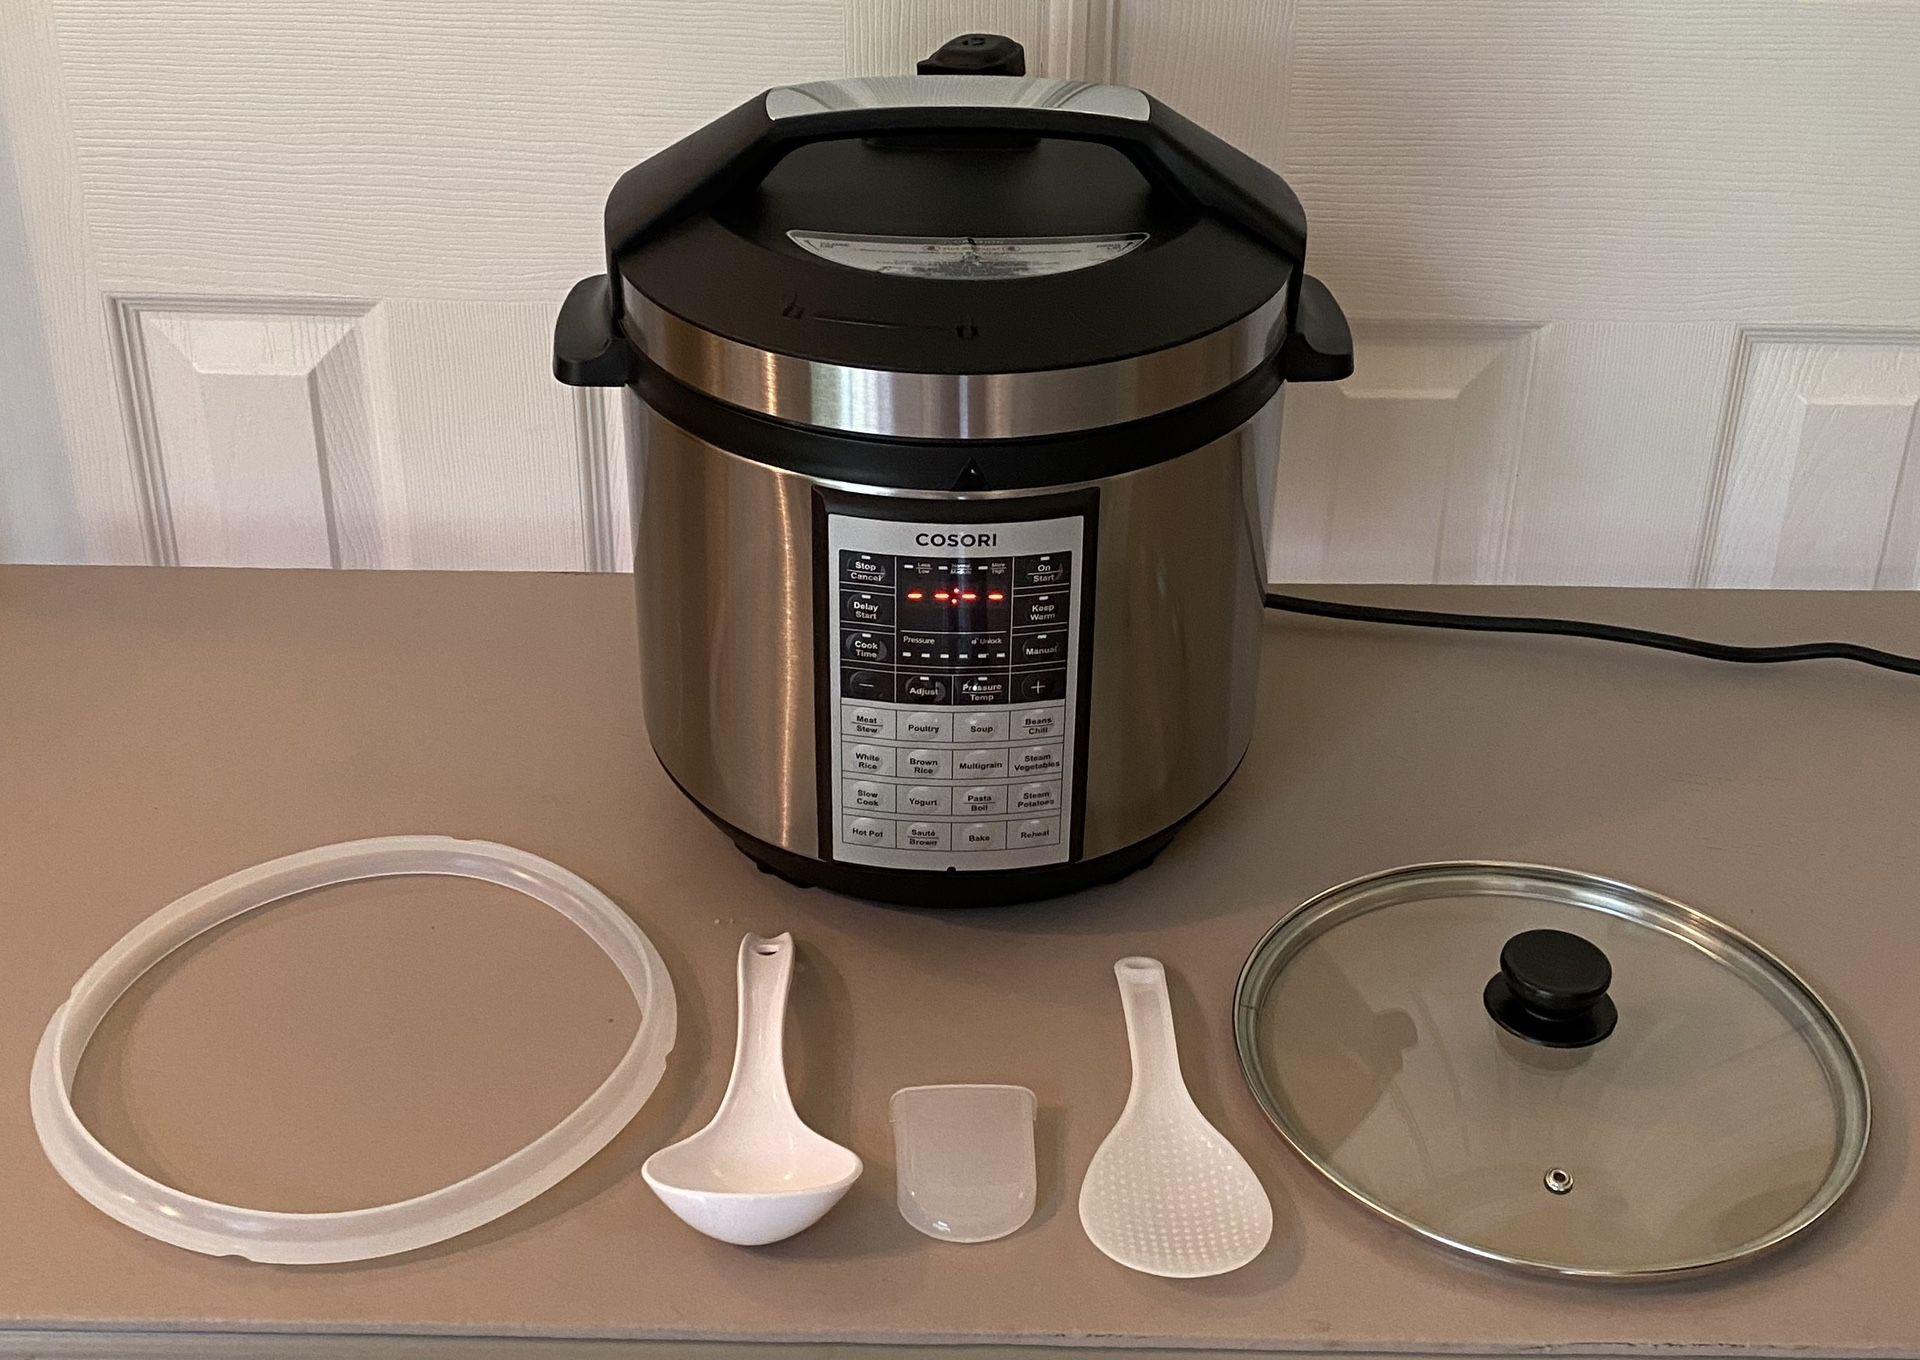 COSORI ELECTRIC PRESSURE COOKER 6 QT 8-IN-1 INSTANT STAINLESS STEEL POT  CP016-PC for Sale in Pompano Beach, FL - OfferUp